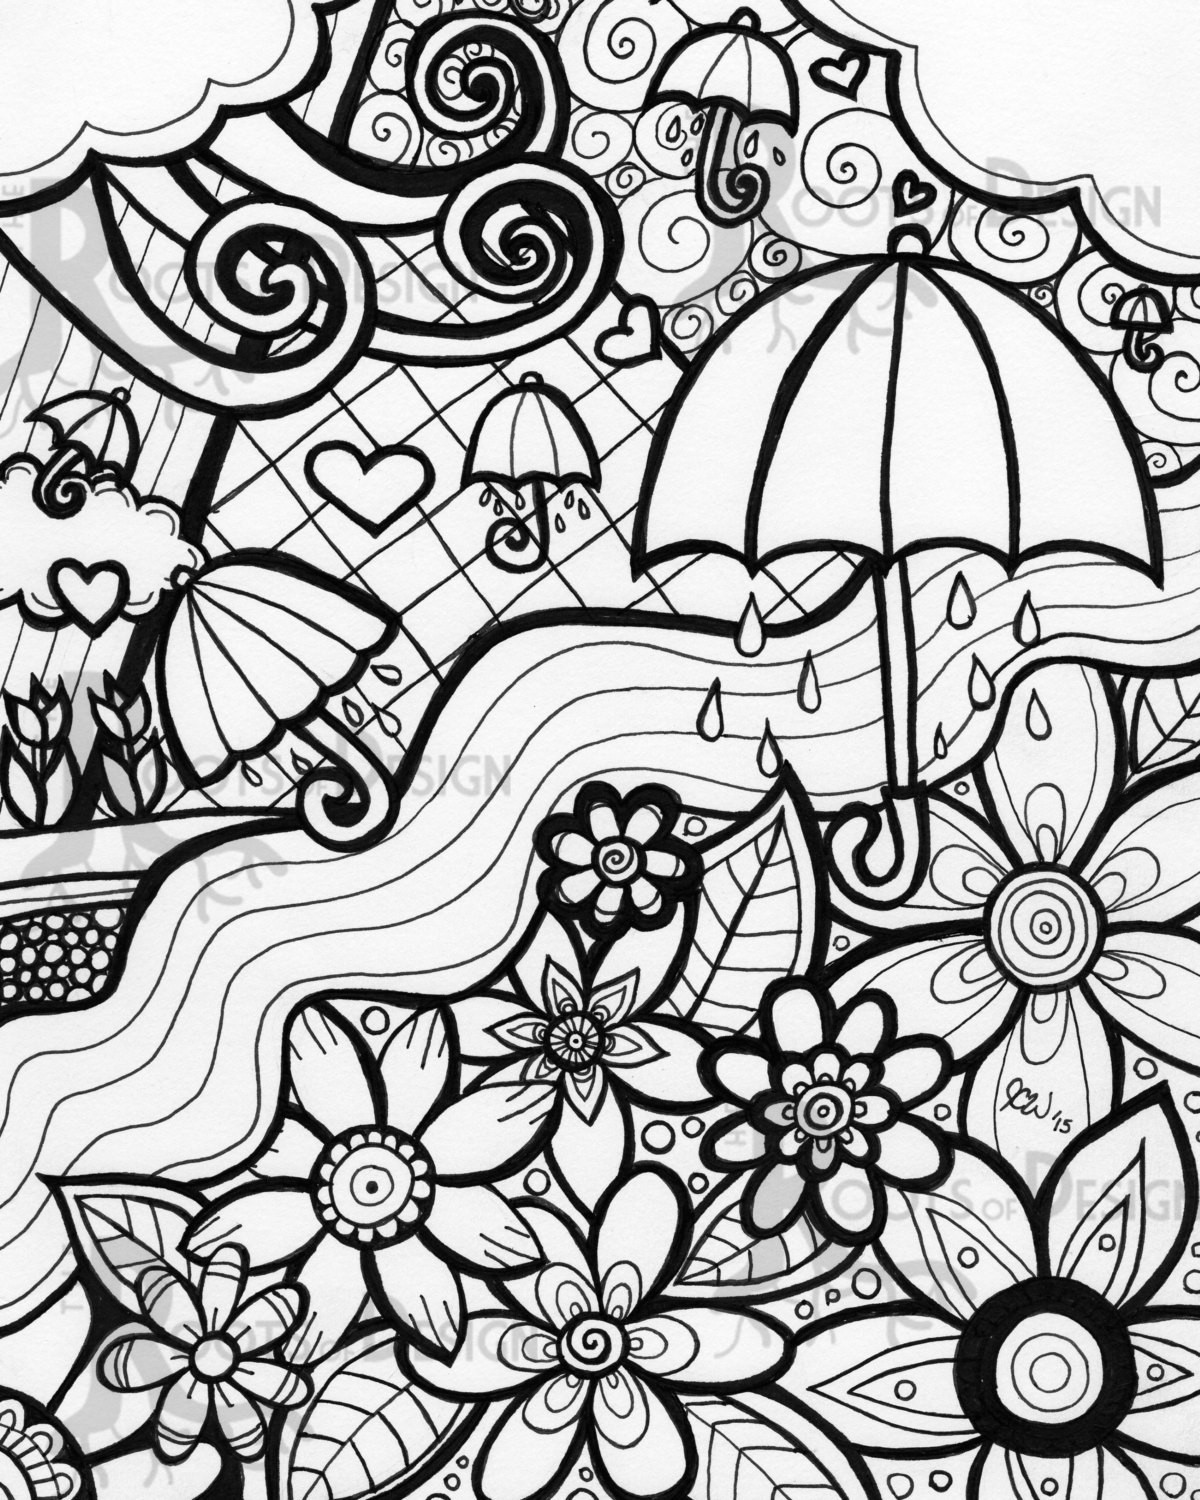 April Showers Coloring Pages
 INSTANT DOWNLOAD Coloring Page April Showers Bring by